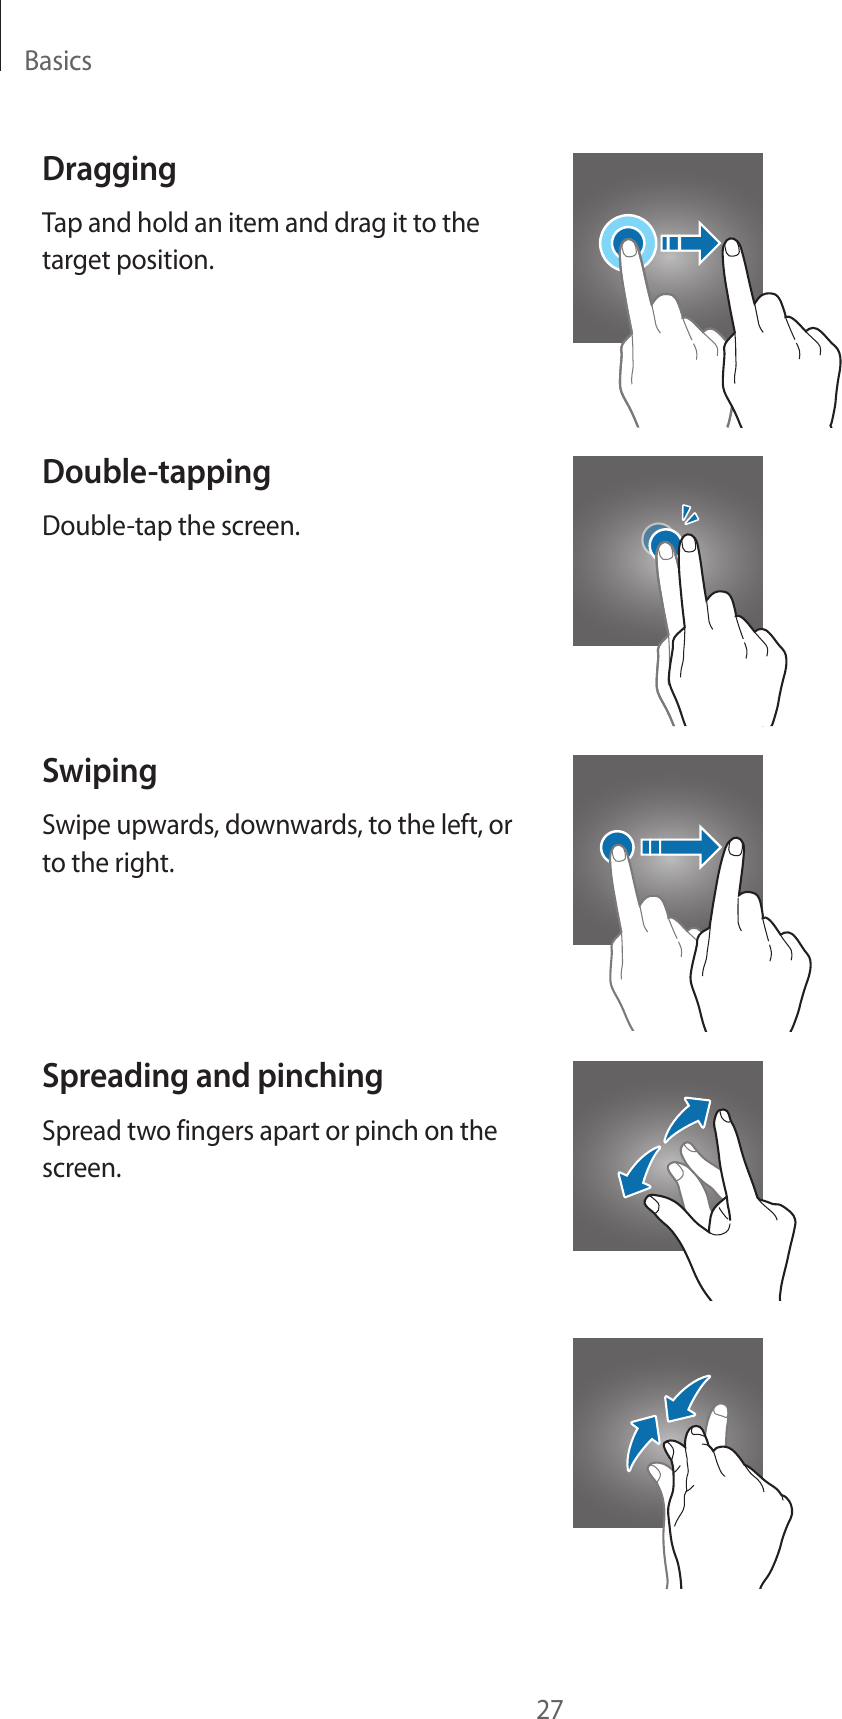 Basics27DraggingTap and hold an item and drag it to the target position.Double-tappingDouble-tap the screen.SwipingSwipe upwards, downwards, to the left, or to the right.Spreading and pinchingSpread two fingers apart or pinch on the screen.